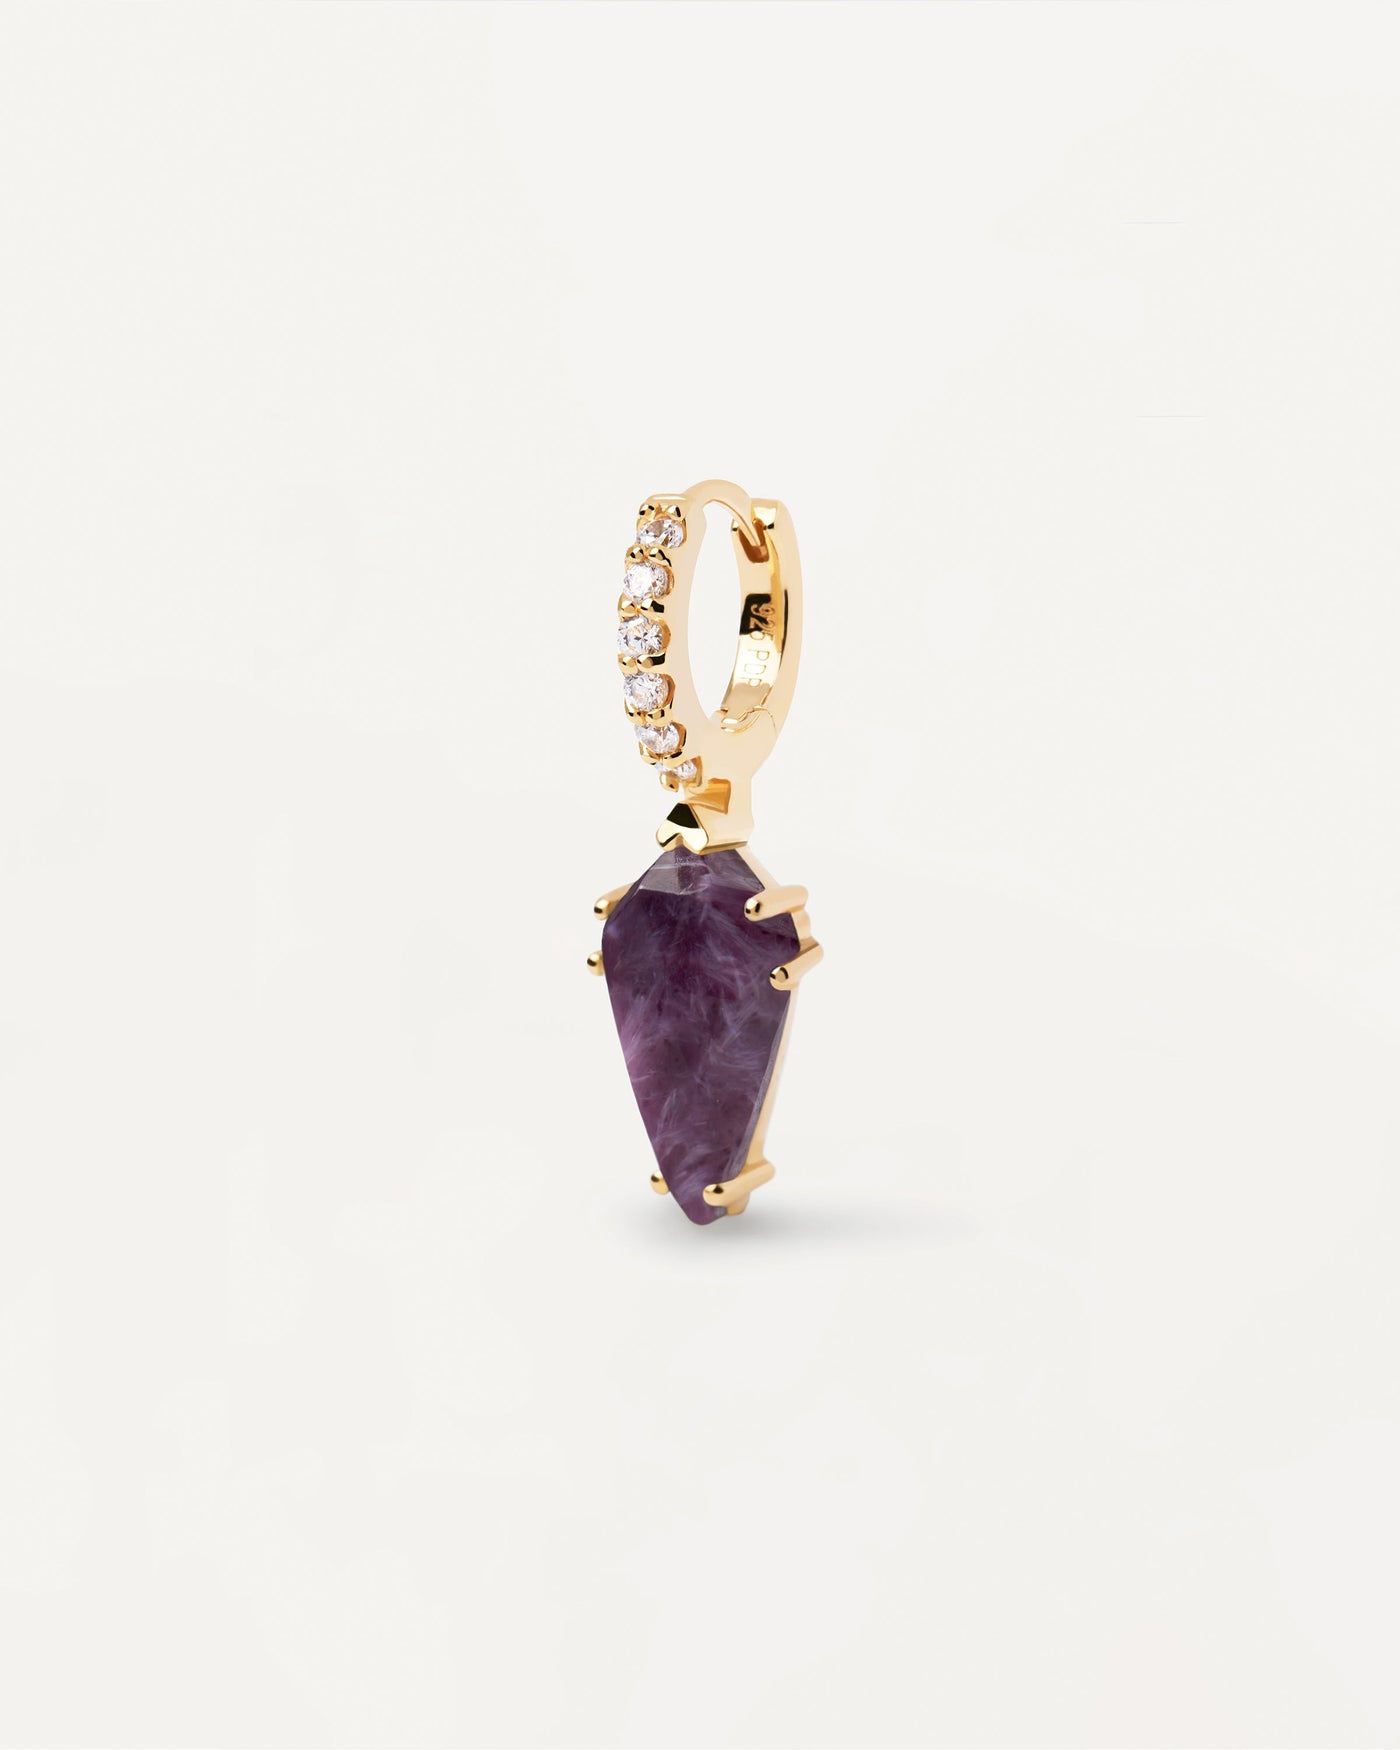 2023 Selection | Naoki Charoite Single Earring. Gold-plated hoop ear piercing with white zirconia and purple pointed gemstone pendant. Get the latest arrival from PDPAOLA. Place your order safely and get this Best Seller. Free Shipping.